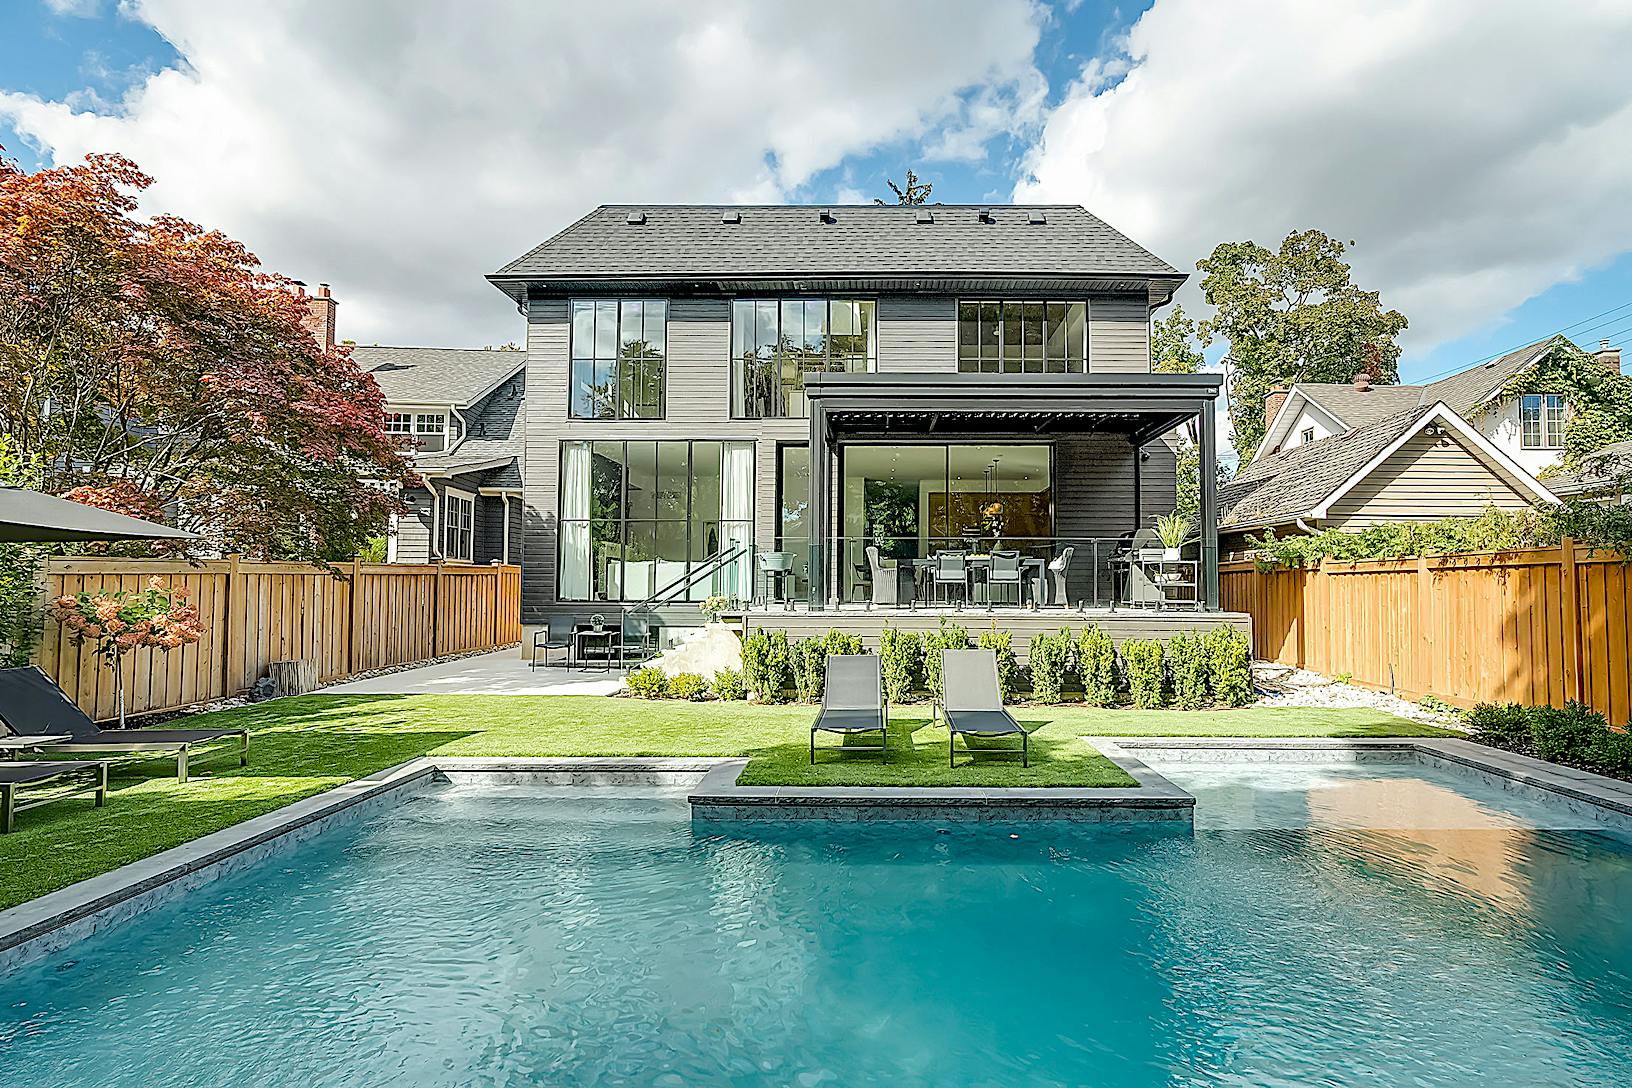 A modern home with a swimming pool in the backyard